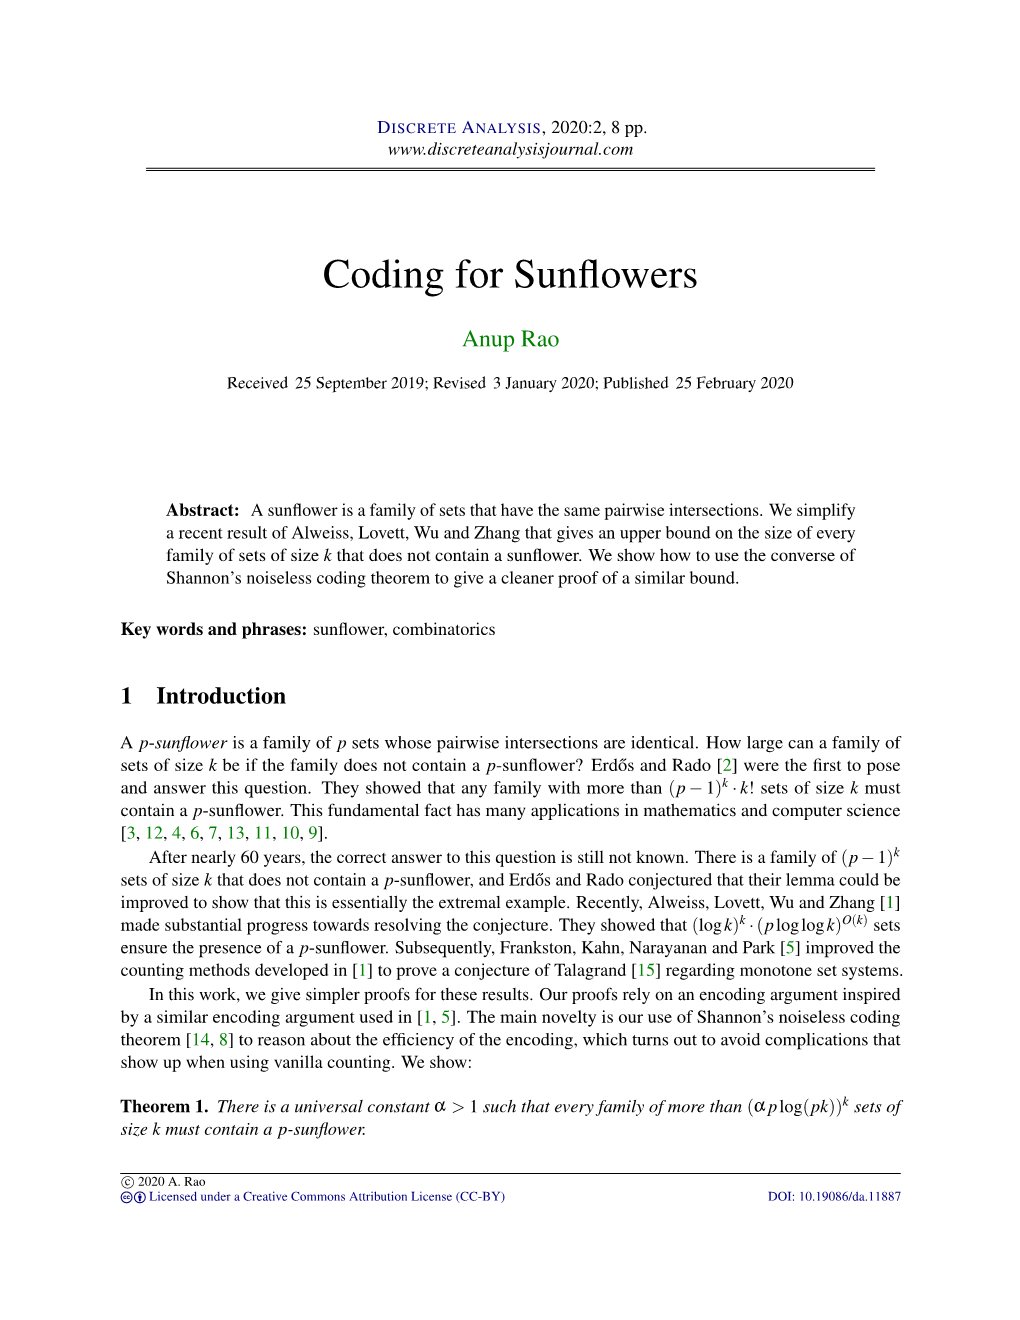 Coding for Sunflowers